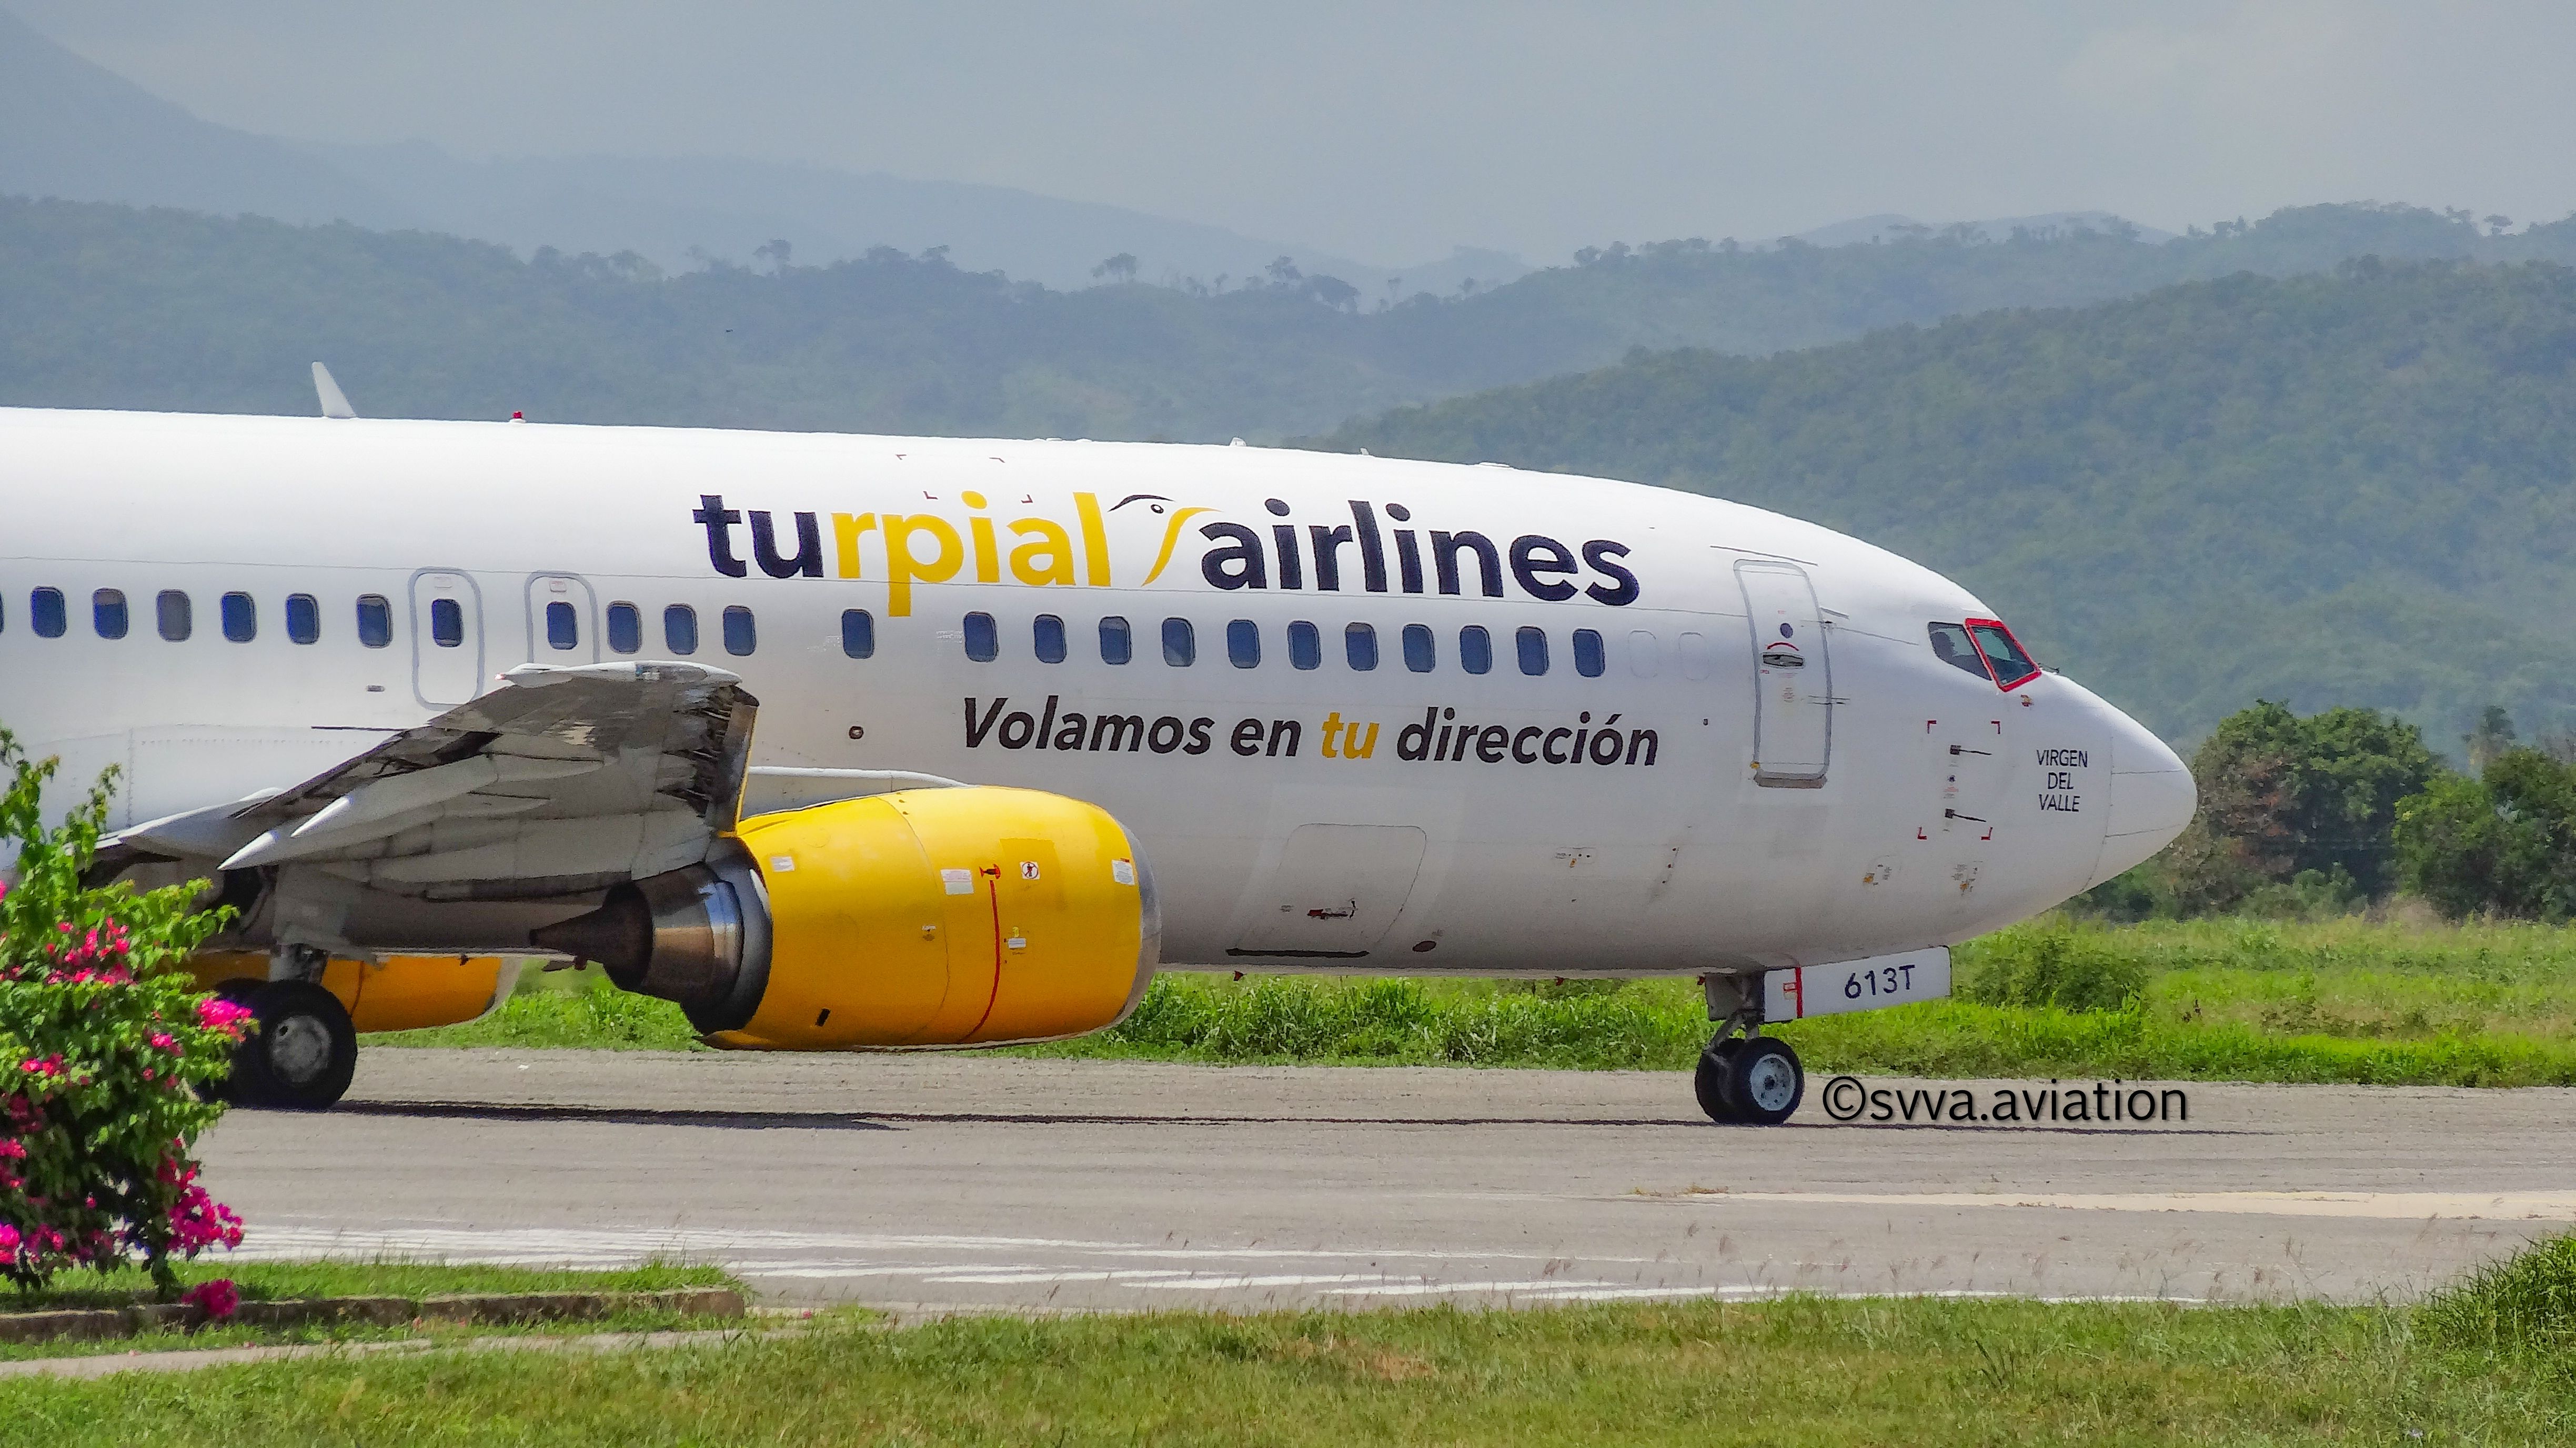 A Turpial Airlines Boeing 737